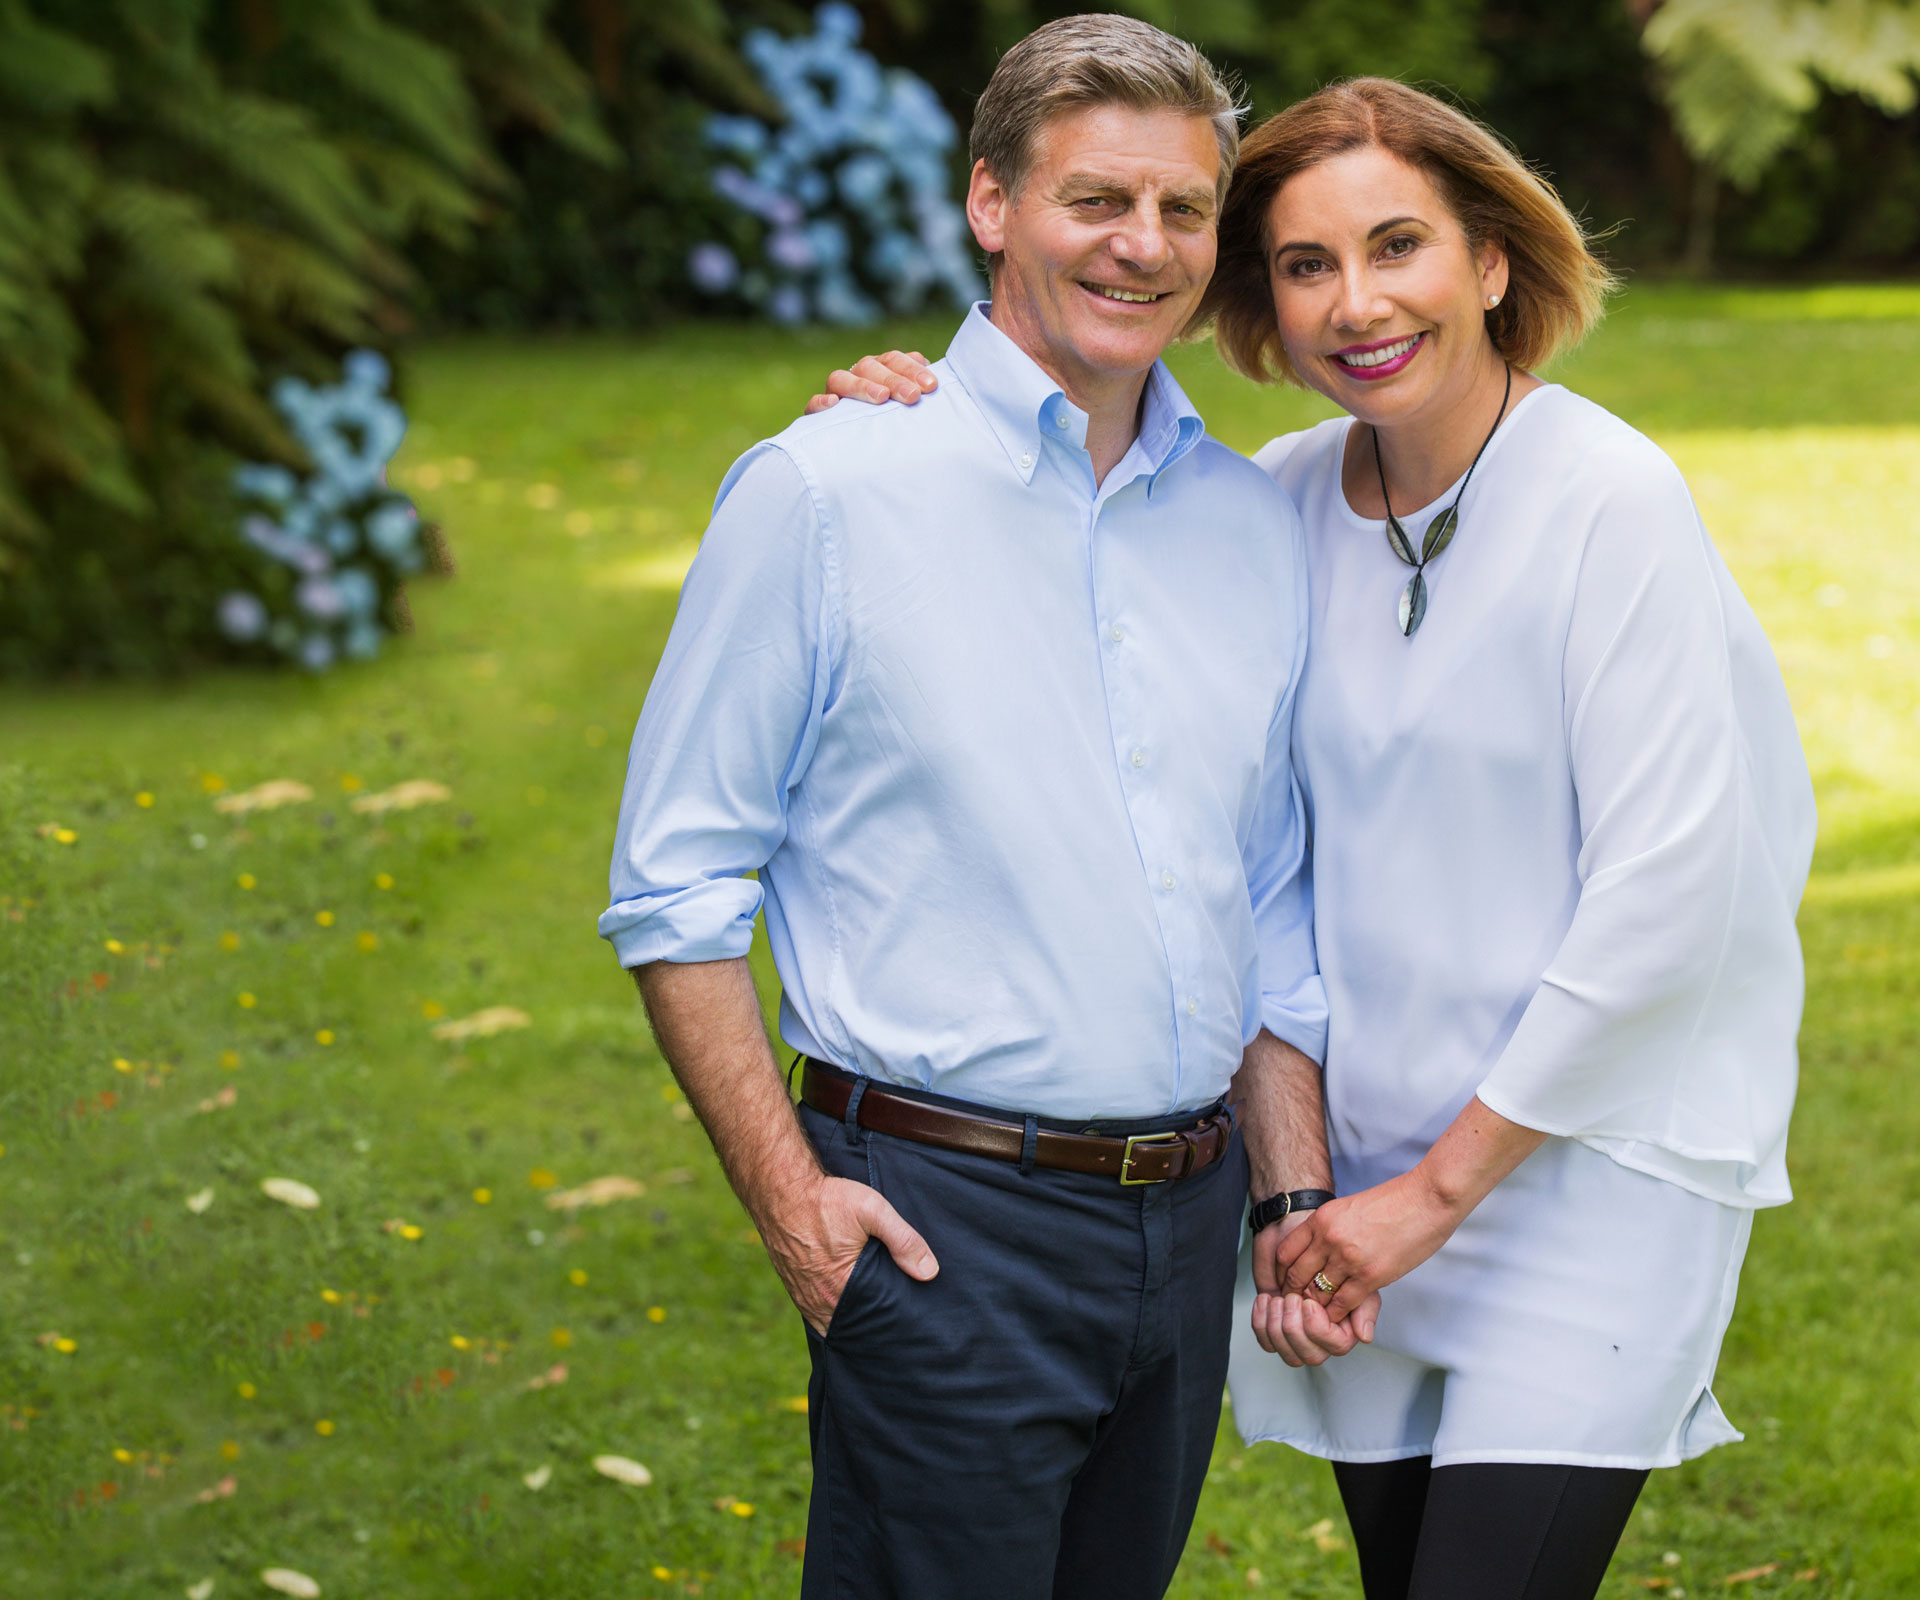 Bill and Mary English’s private love story